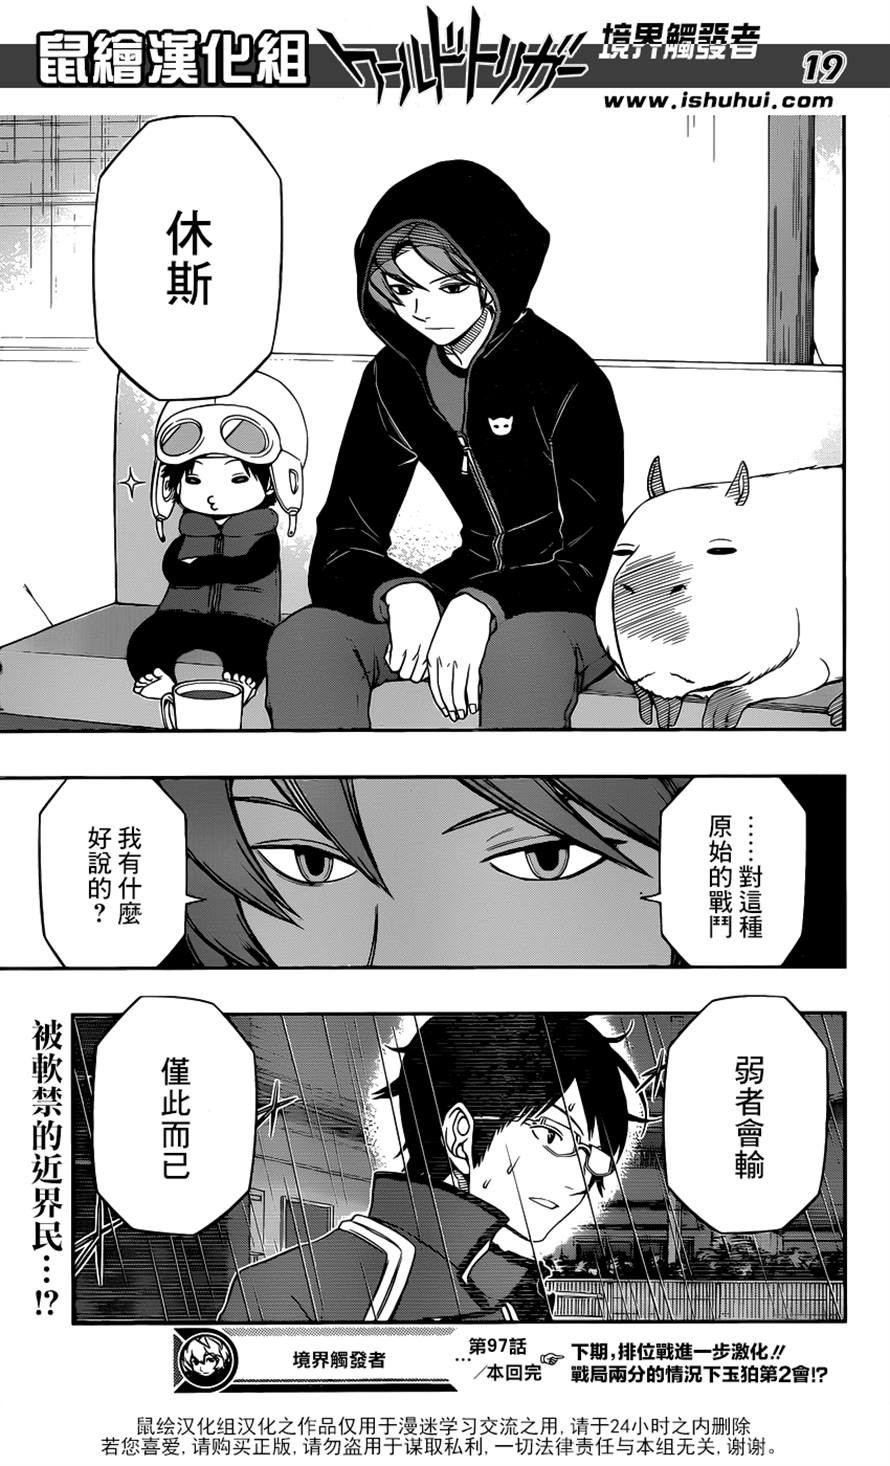 World Trigger - Chapter 97 - Page 19